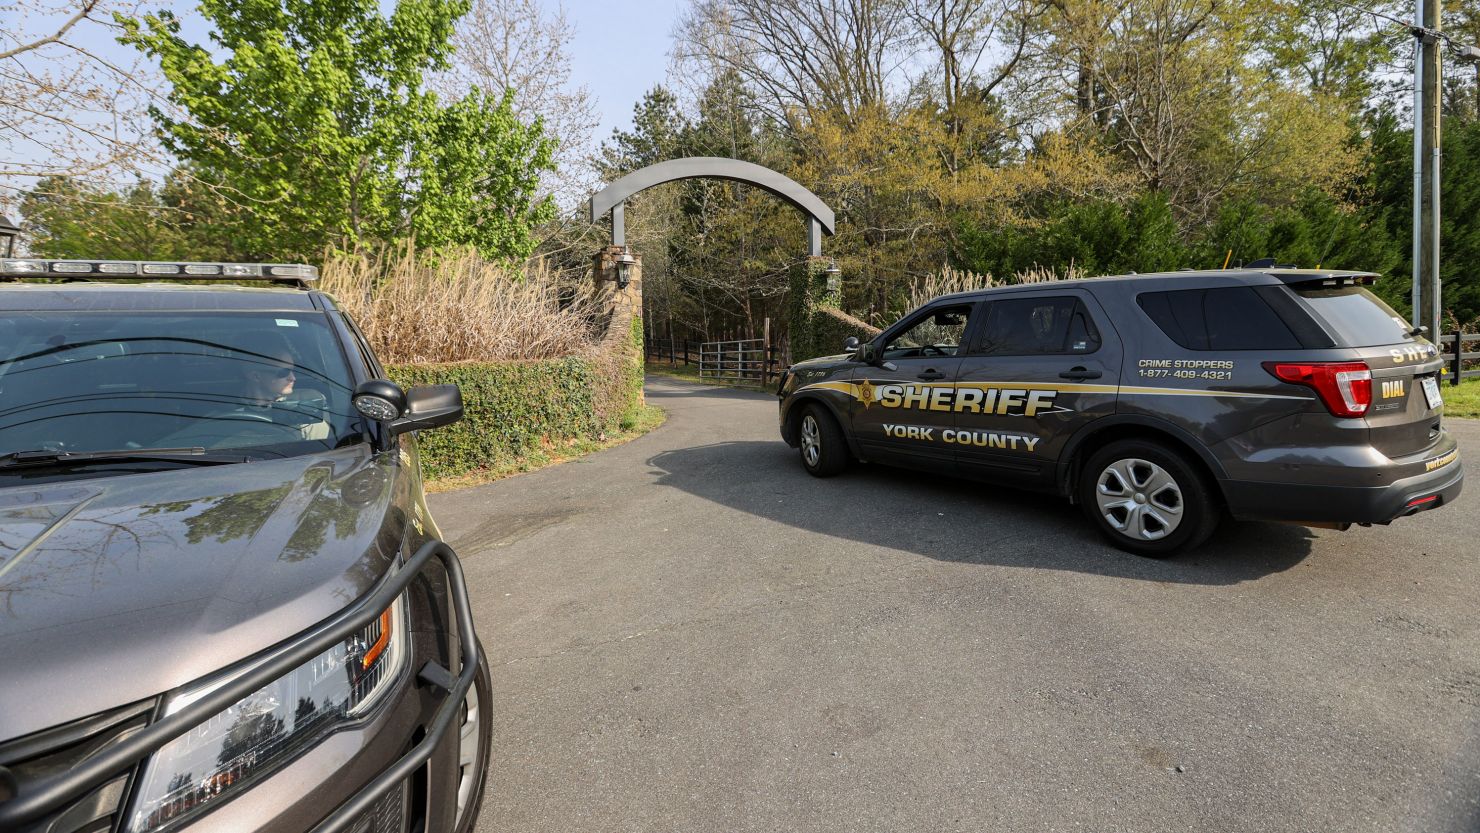 A York County sheriff vehicle drives onto the property where multiple people, including a prominent doctor, were fatally shot on April 7.